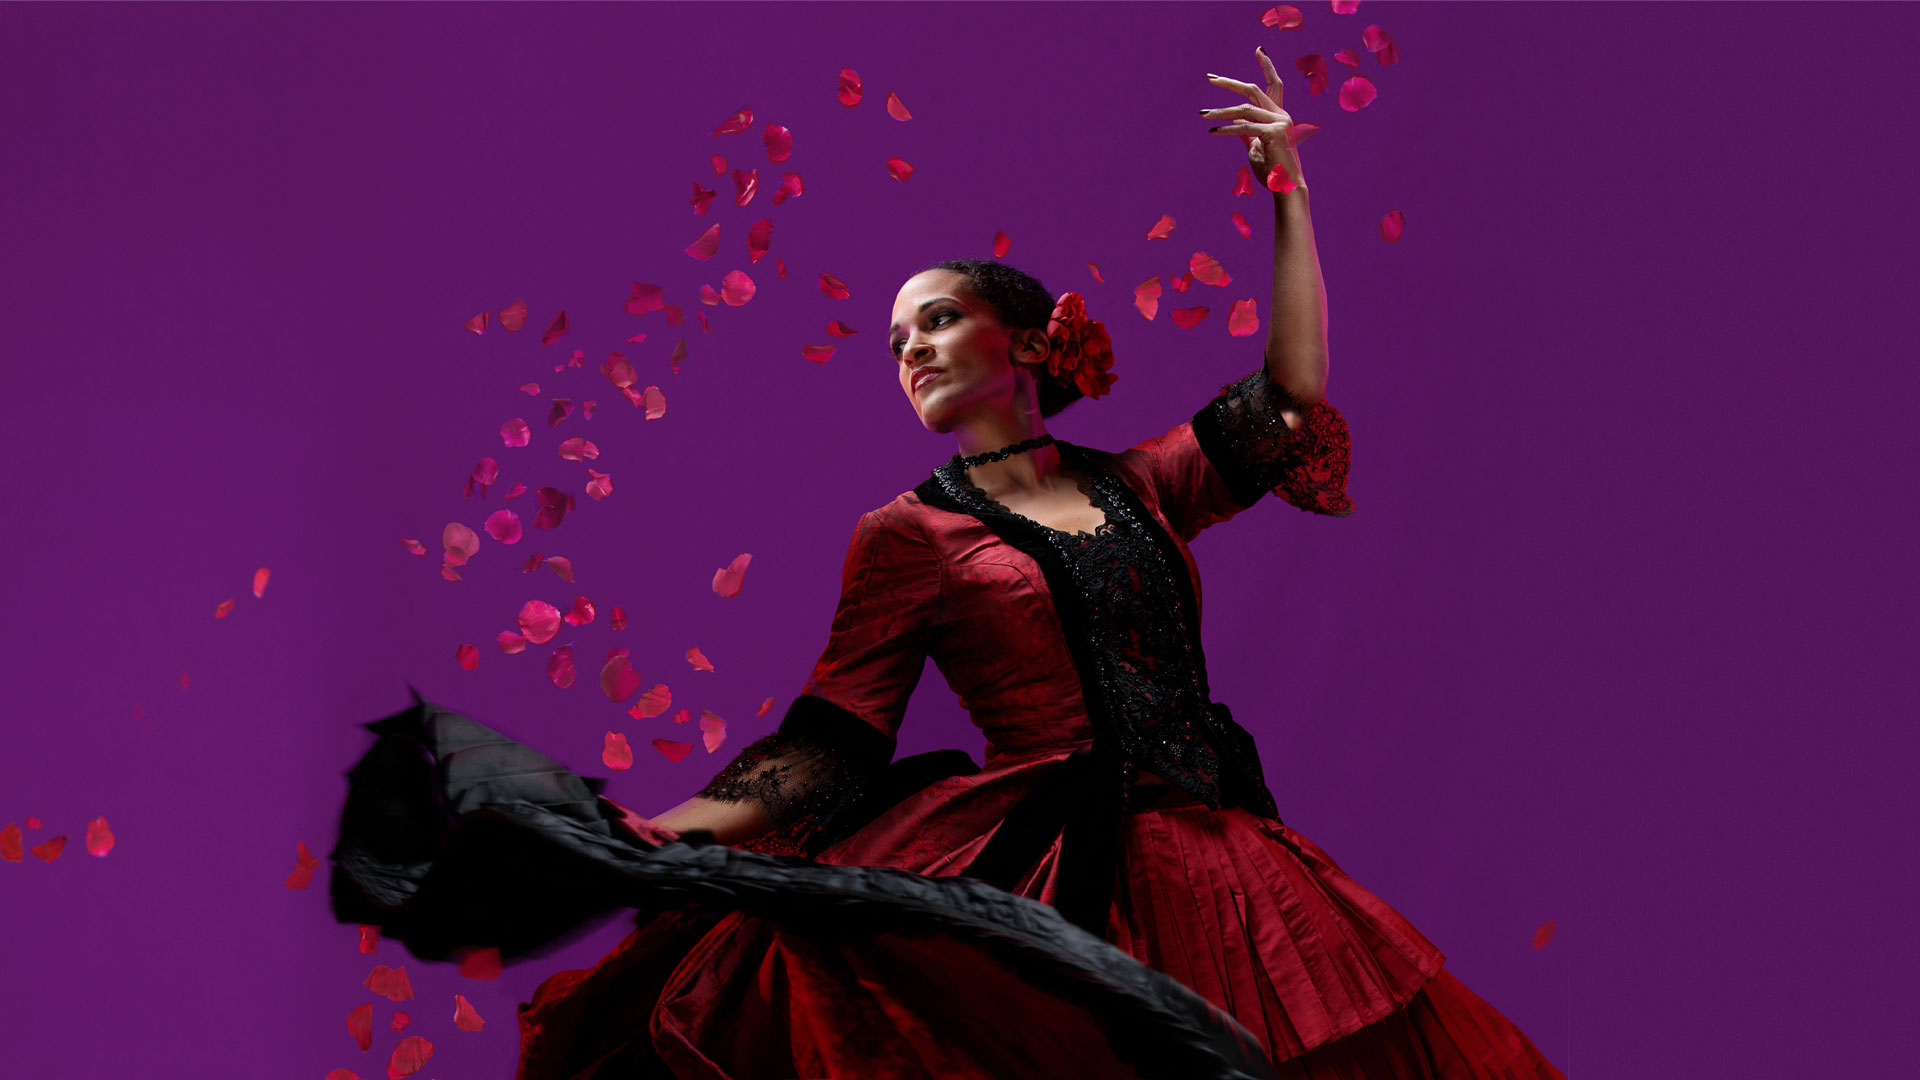 Bizet's Carmen - Learn about the plot and characters.